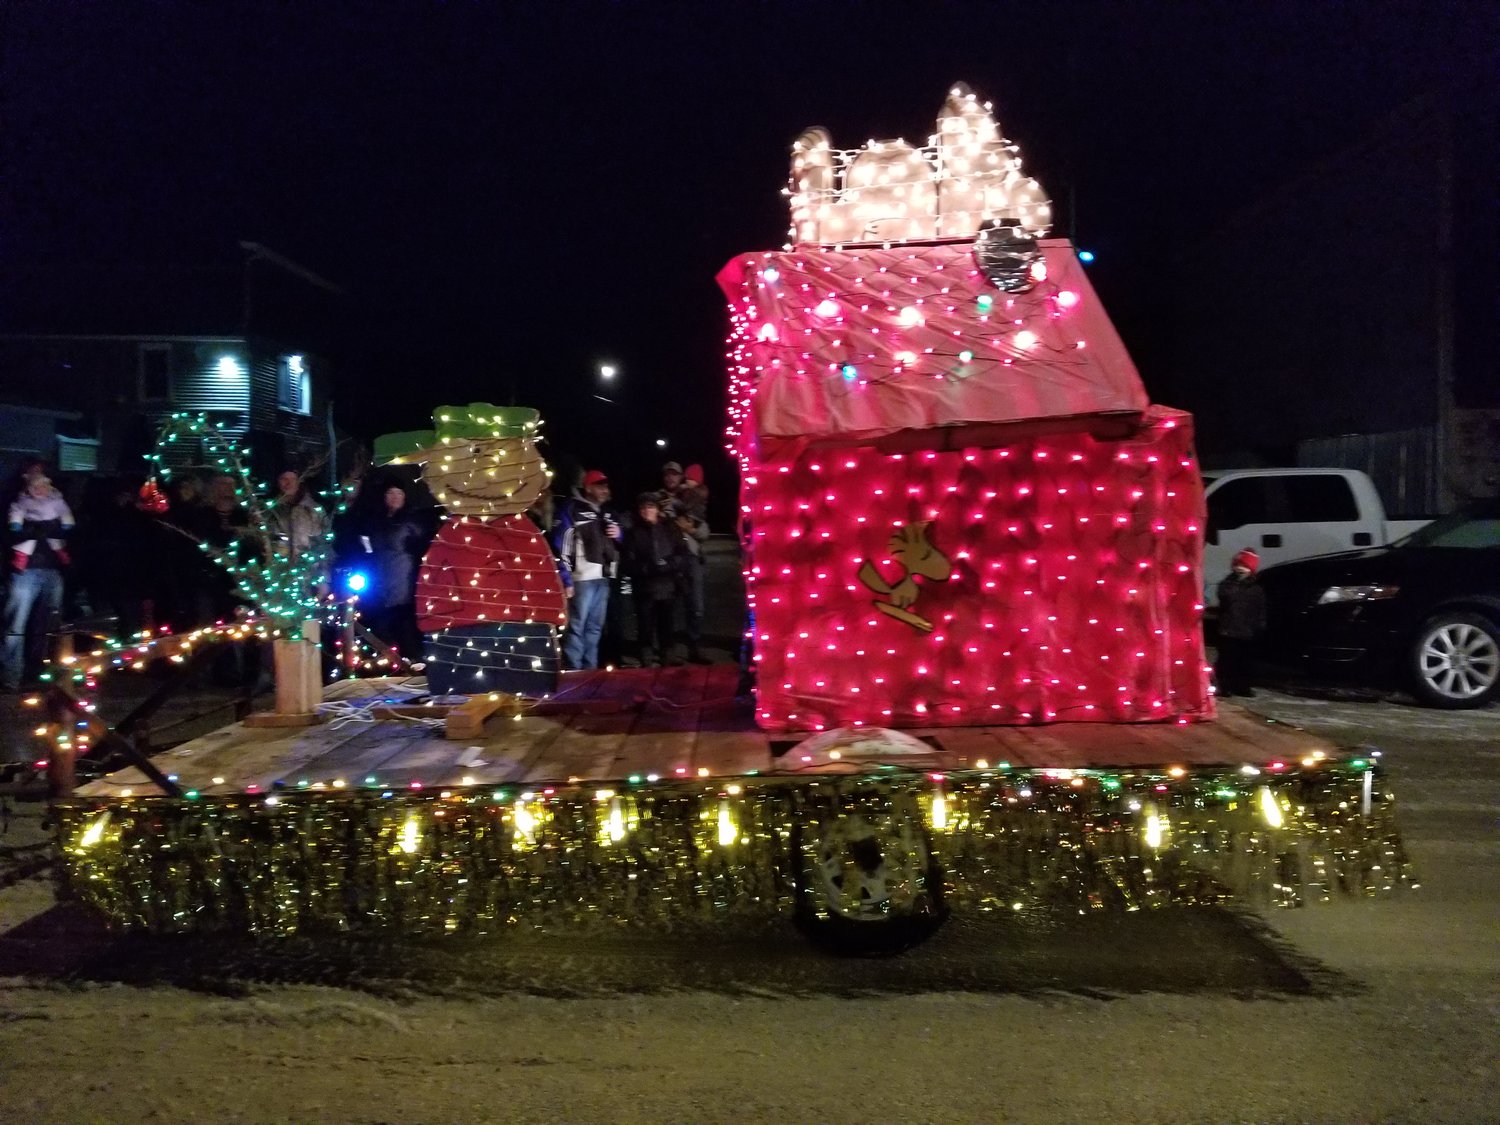 The winning entry in the 2nd annual Bellechester lighted parade was Charlie Brown, Snoopy, and his doghouse created by Nick and Kim Keller from scrap materials.